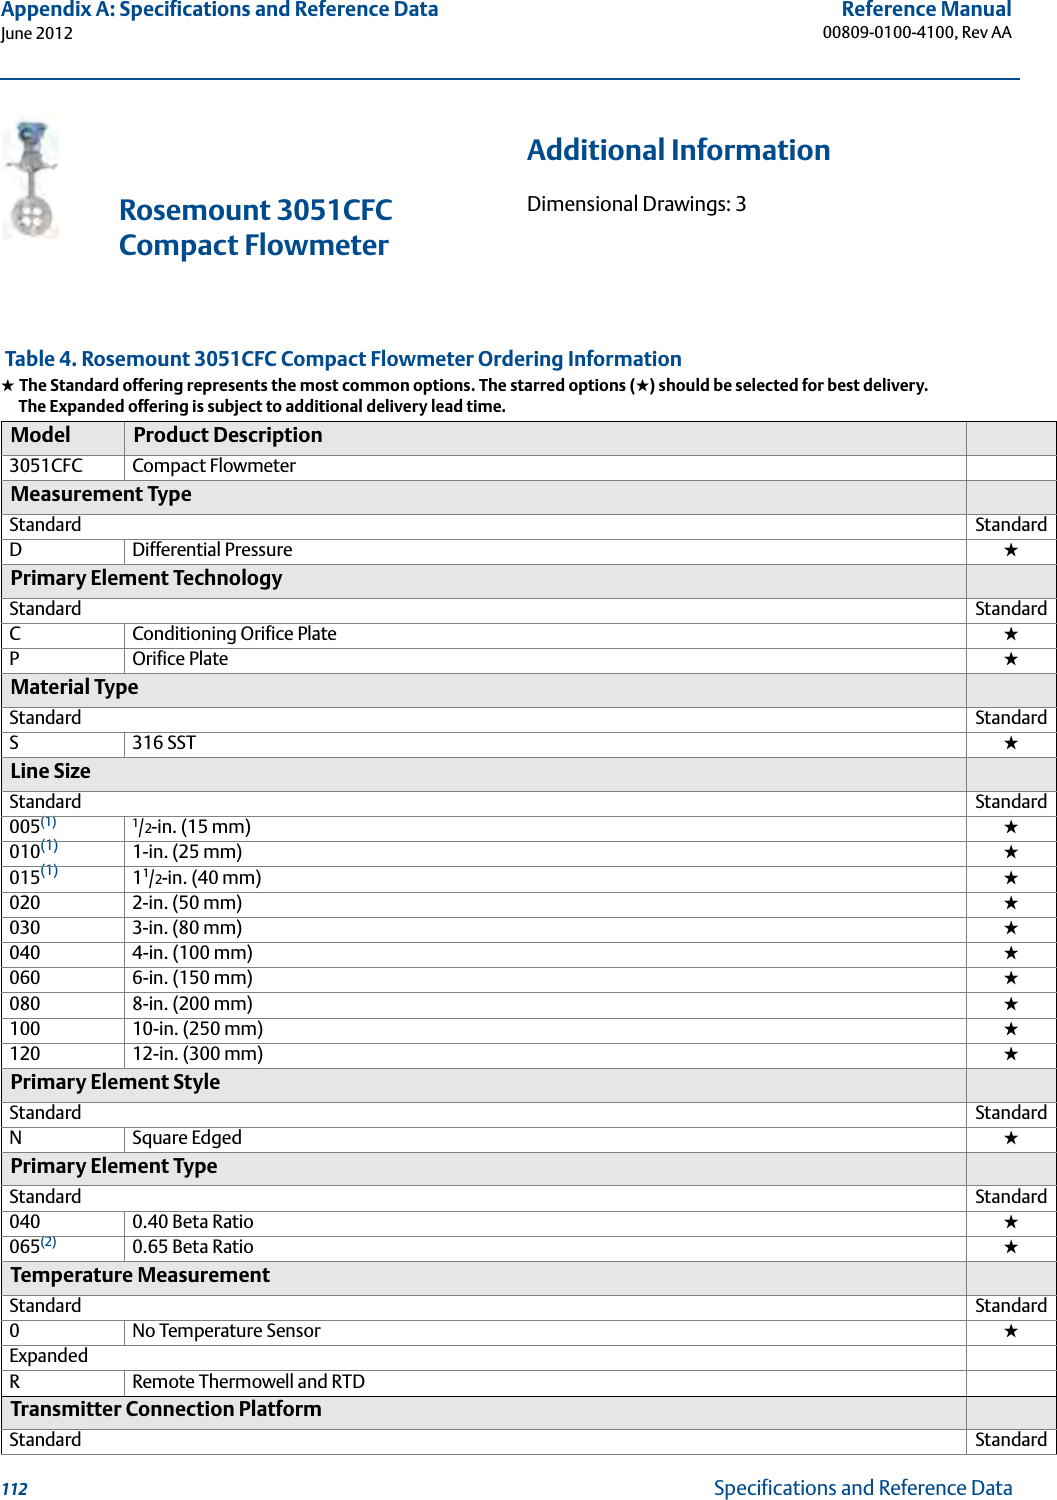 112Reference Manual00809-0100-4100, Rev AAAppendix A: Specifications and Reference DataJune 2012Specifications and Reference DataRosemount 3051CFC Compact Flowmeter Table 4. Rosemount 3051CFC Compact Flowmeter Ordering Information★ The Standard offering represents the most common options. The starred options (★) should be selected for best delivery.__The Expanded offering is subject to additional delivery lead time.Model Product Description3051CFC Compact FlowmeterMeasurement TypeStandard StandardDDifferential Pressure  ★Primary Element TechnologyStandard StandardCConditioning Orifice Plate ★POrifice Plate ★Material TypeStandard StandardS316 SST ★Line SizeStandard Standard005(1) 1/2-in. (15 mm) ★010(1) 1-in. (25 mm) ★015(1) 11/2-in. (40 mm) ★020 2-in. (50 mm) ★030 3-in. (80 mm) ★040 4-in. (100 mm) ★060 6-in. (150 mm) ★080 8-in. (200 mm) ★100 10-in. (250 mm) ★120 12-in. (300 mm) ★Primary Element StyleStandard StandardNSquare Edged ★Primary Element TypeStandard Standard040 0.40 Beta Ratio ★065(2) 0.65 Beta Ratio ★Temperature MeasurementStandard Standard0No Temperature Sensor ★ExpandedRRemote Thermowell and RTDTransmitter Connection PlatformStandard StandardAdditional InformationDimensional Drawings: 3